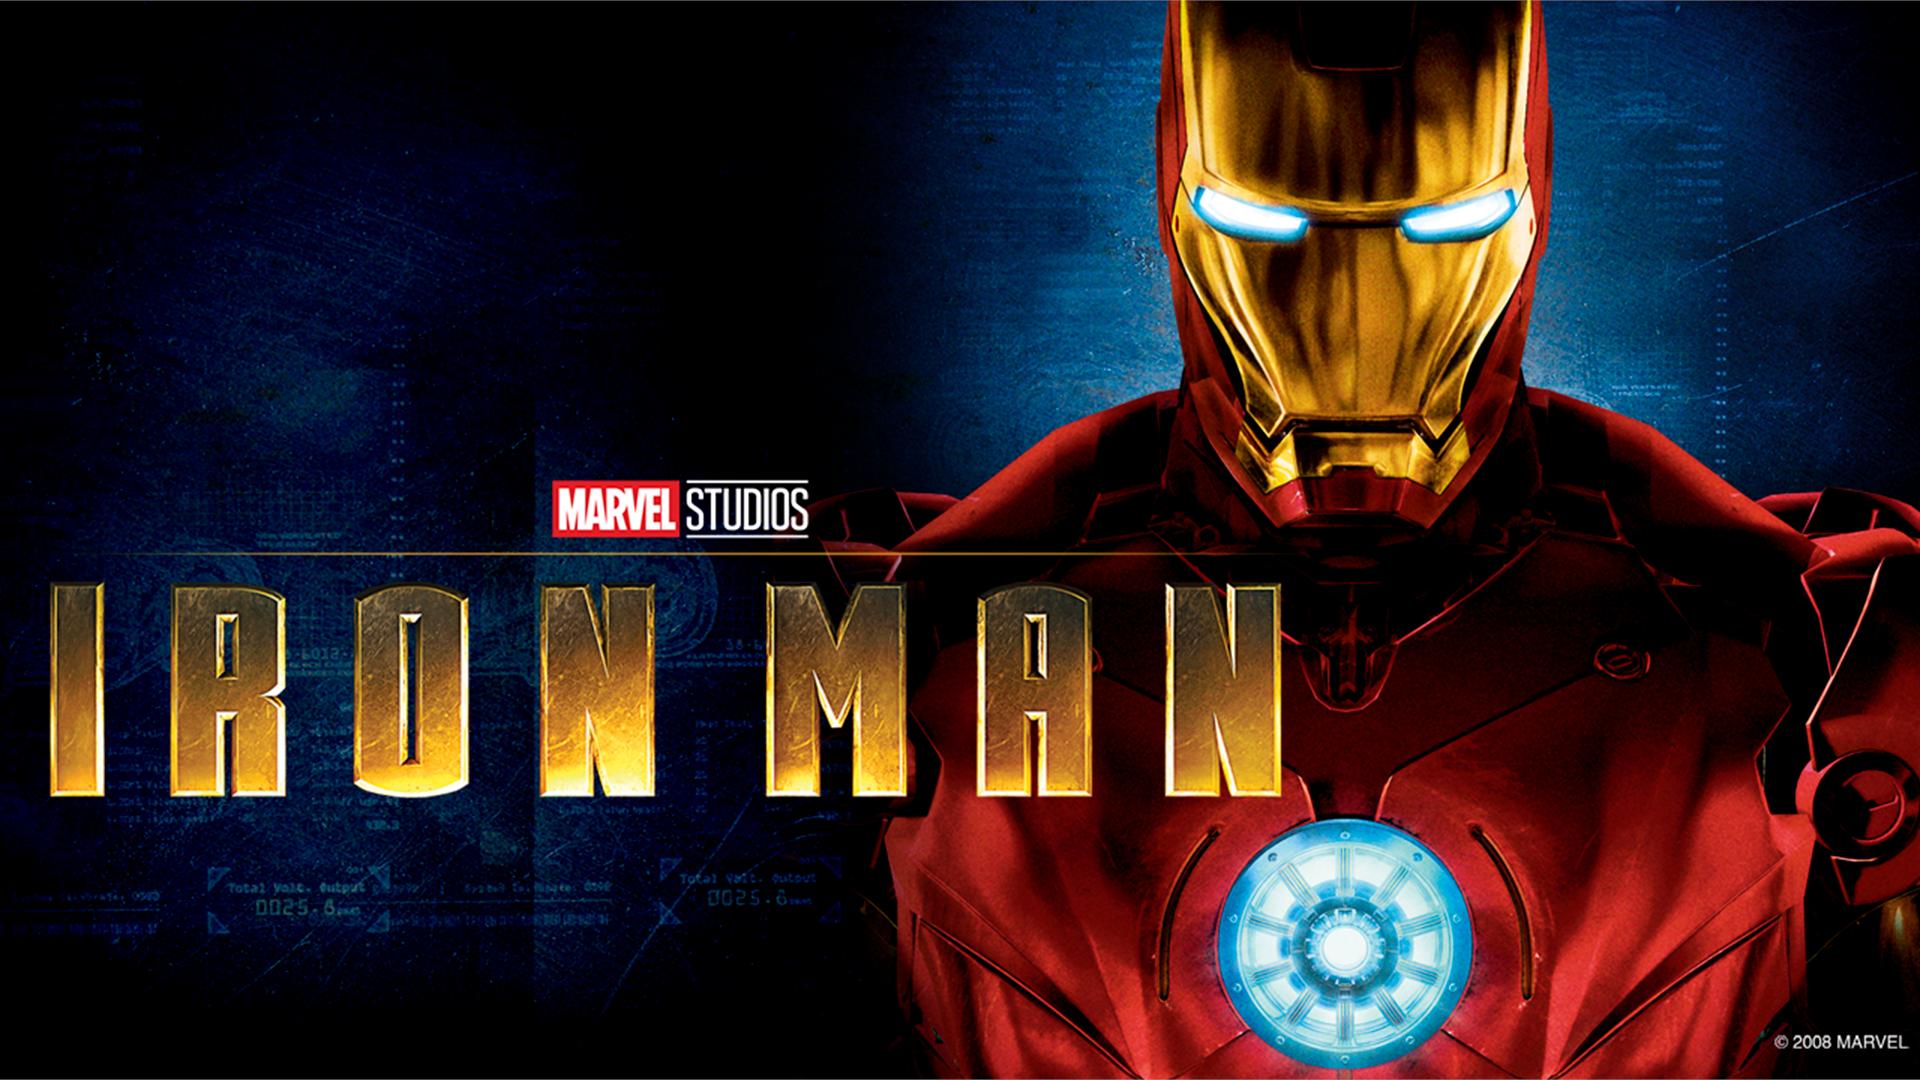 With Iron Man, Marvel began a universe of flawed heroes and tales of